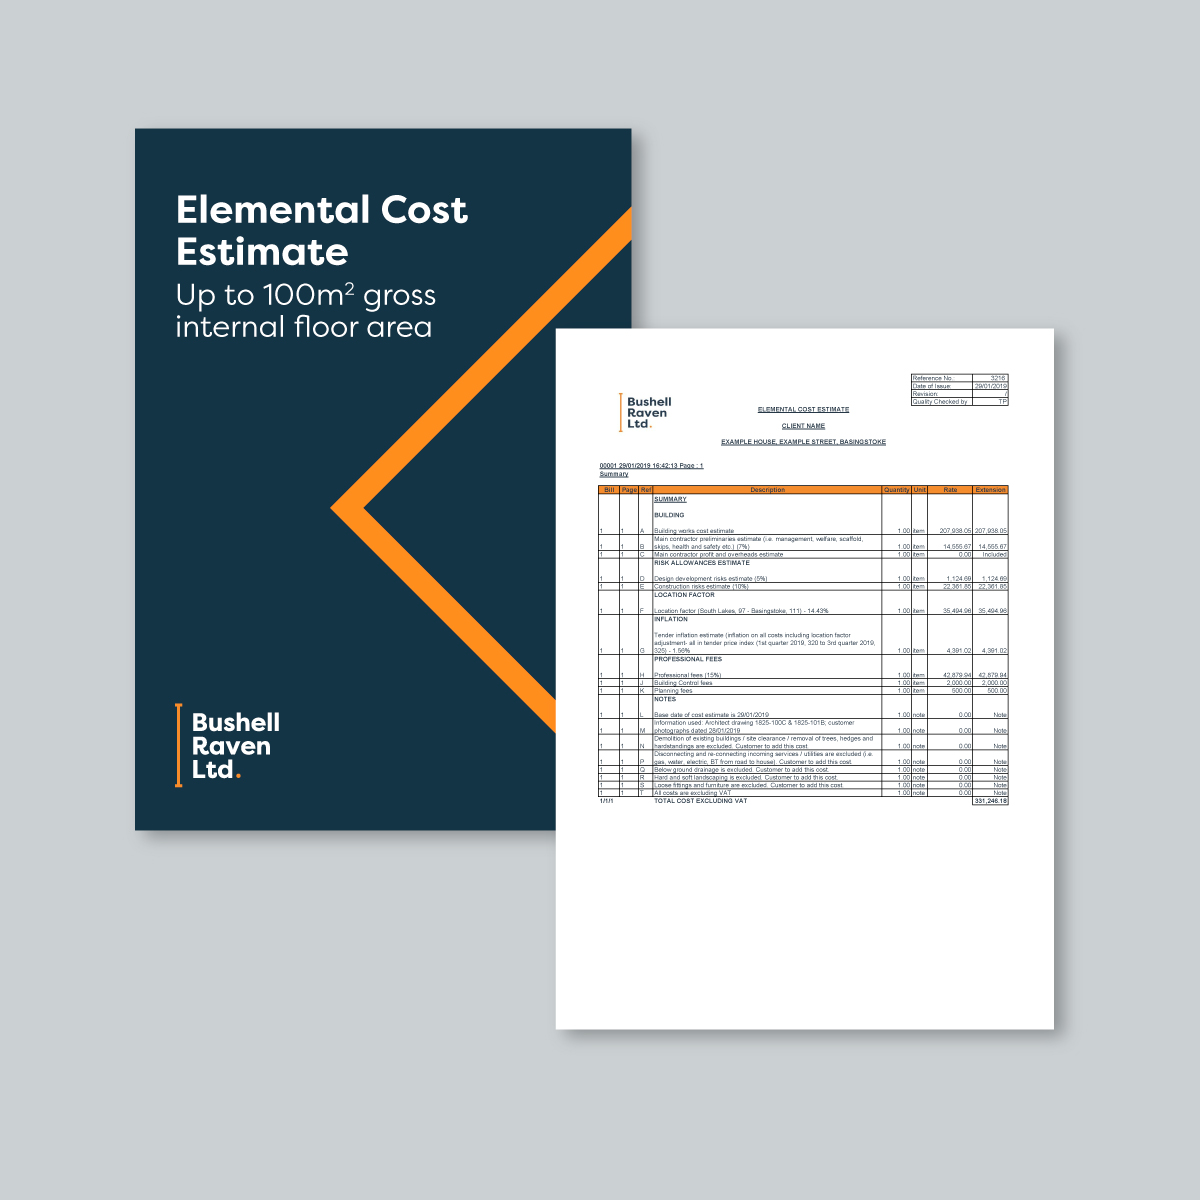 Elemental Cost Estimate Calculation Up To 100m2 Gross Internal